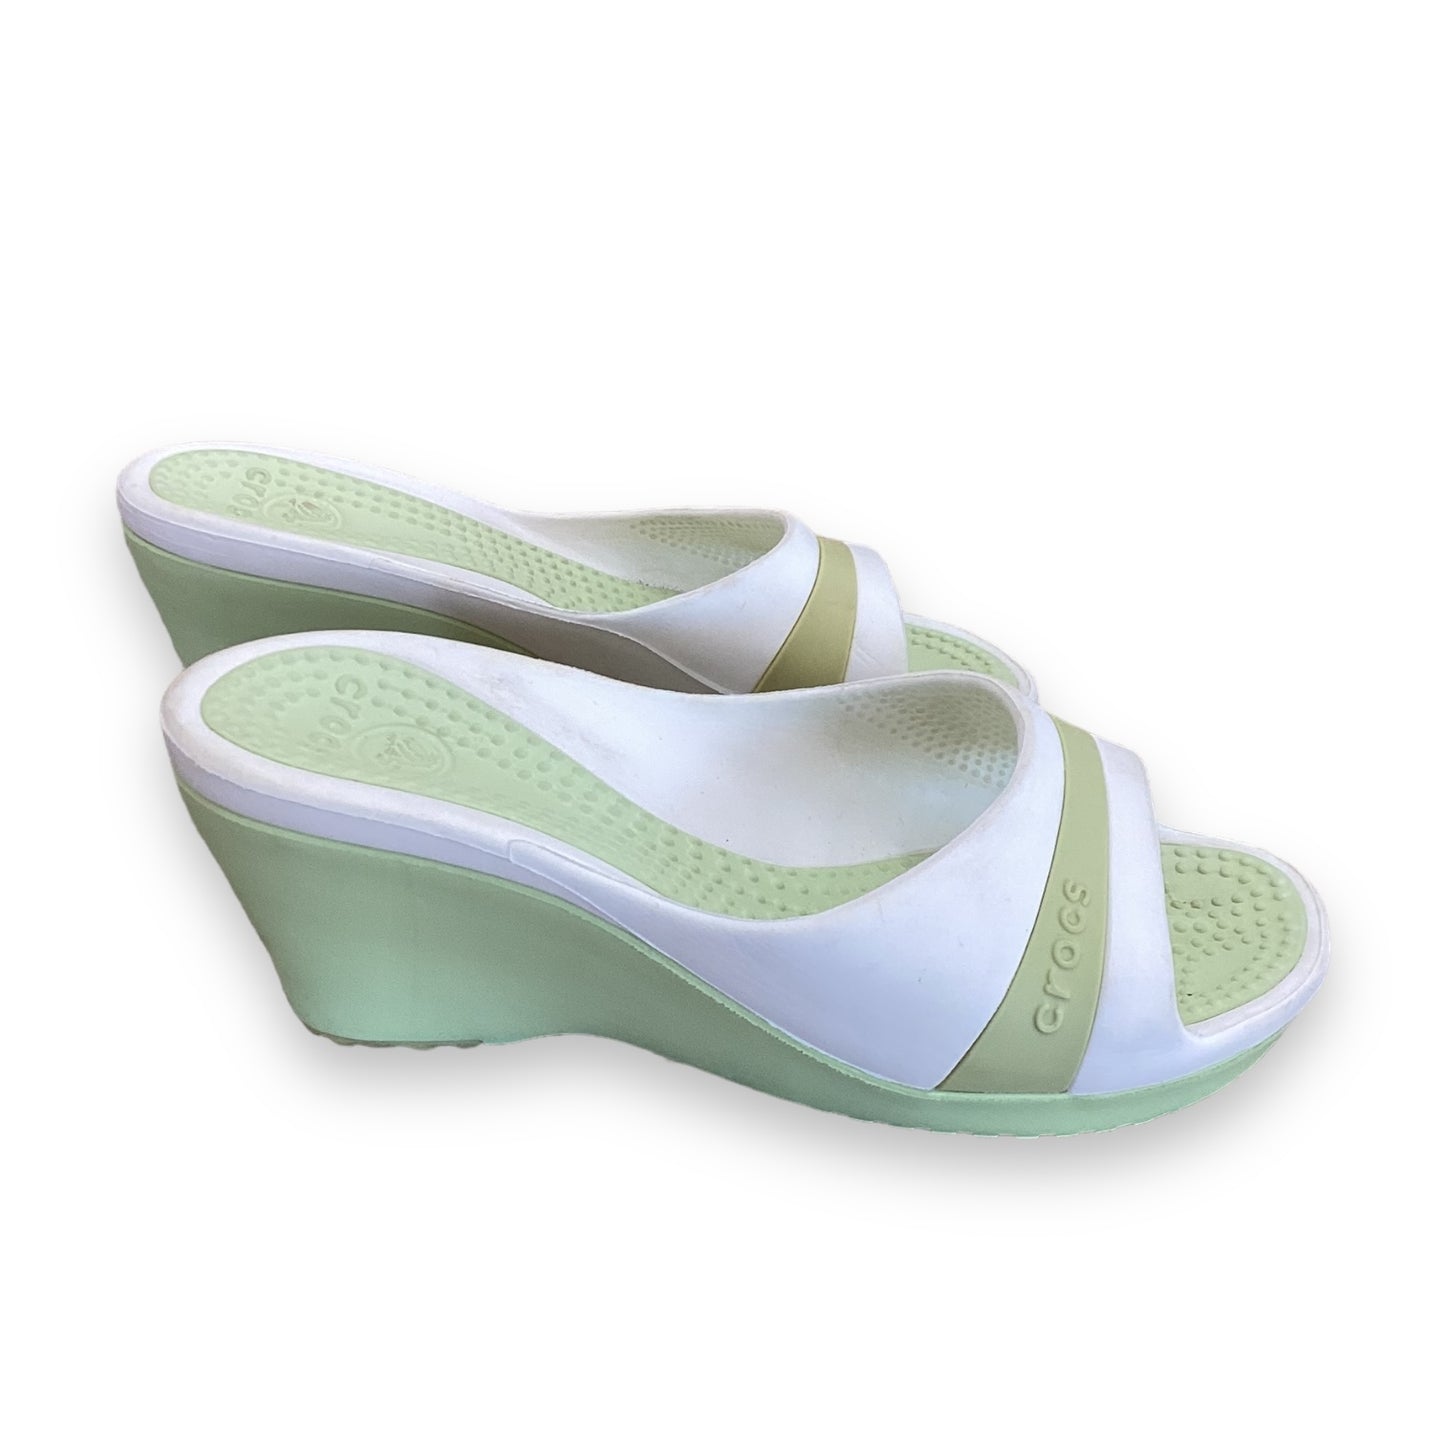 Shoes Heels Wedge By Crocs  Size: 6